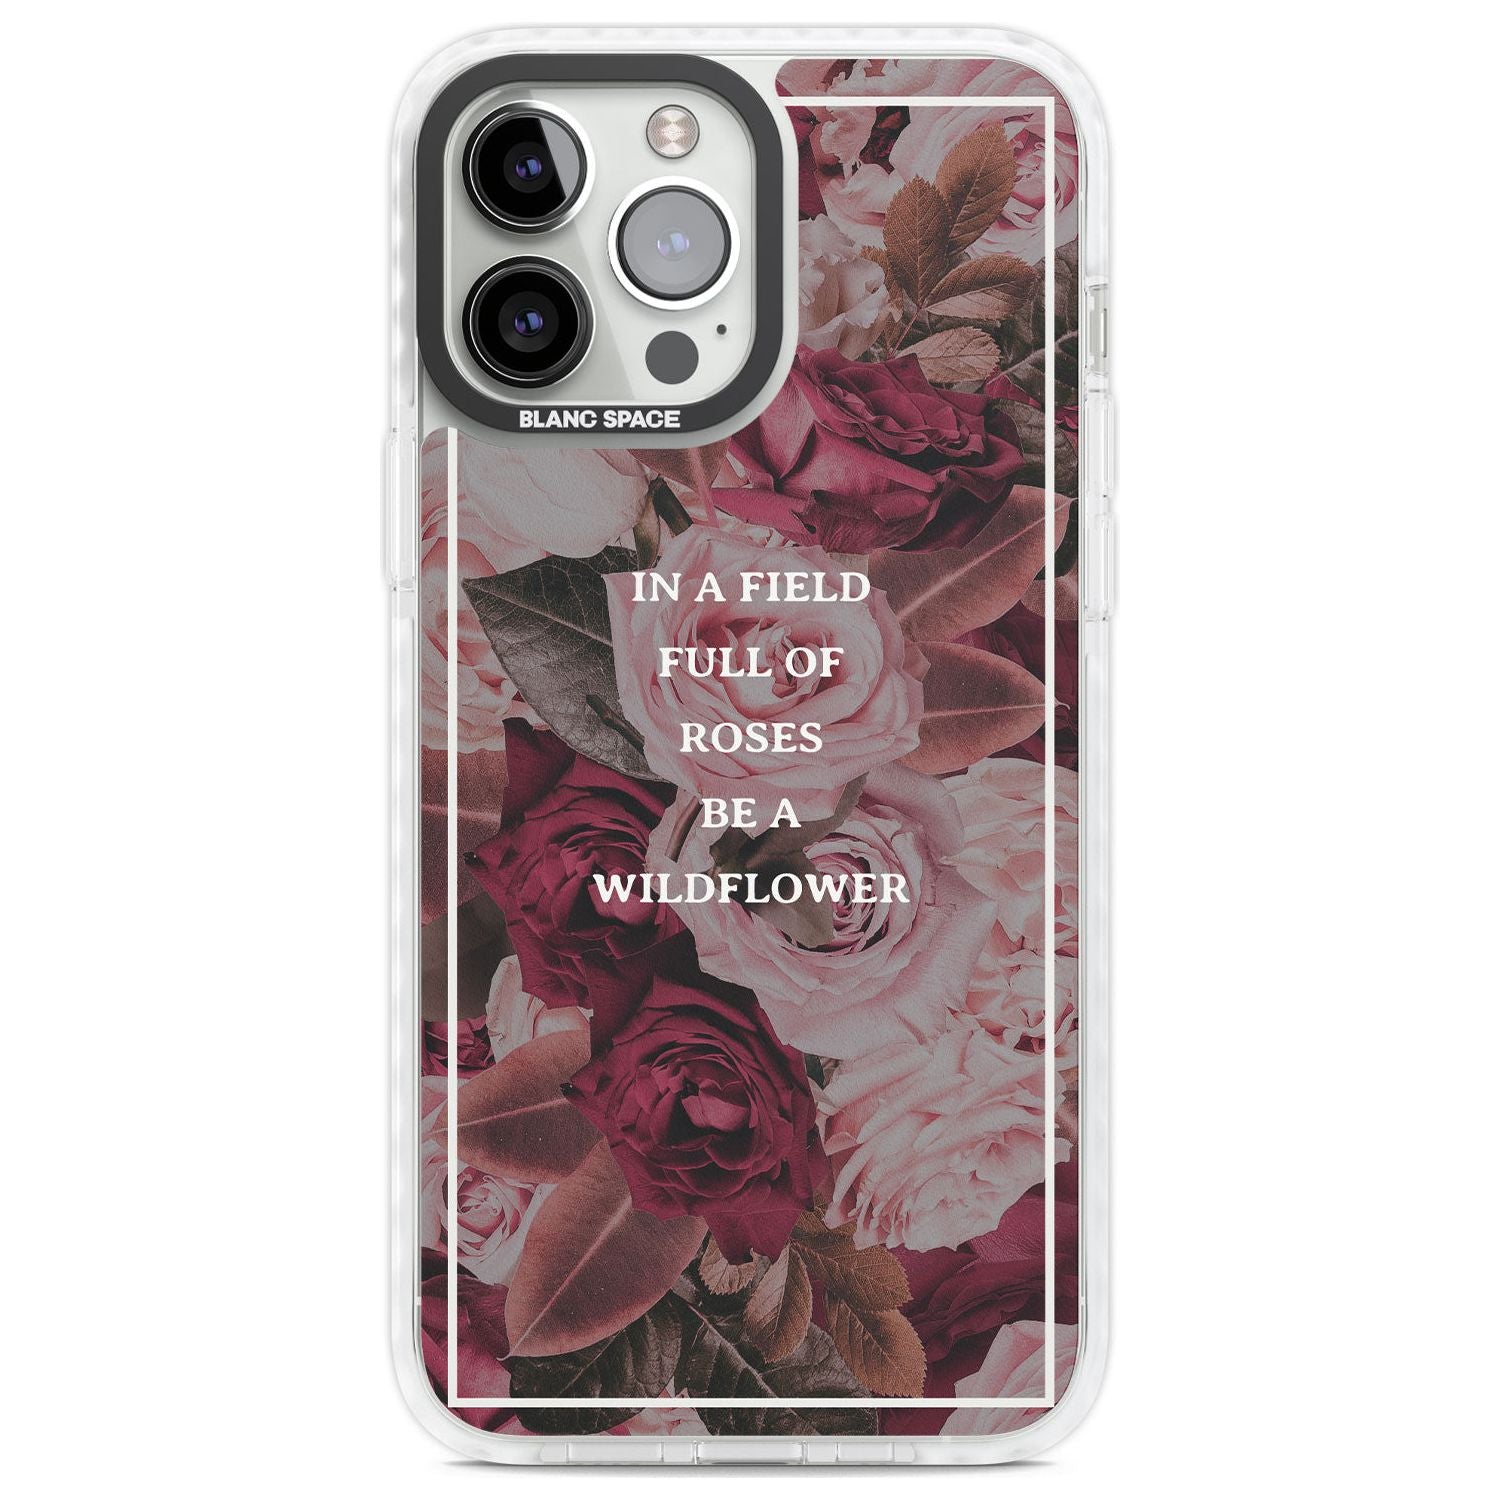 Be a Wildflower Floral Quote Phone Case iPhone 13 Pro Max / Impact Case,iPhone 14 Pro Max / Impact Case Blanc Space